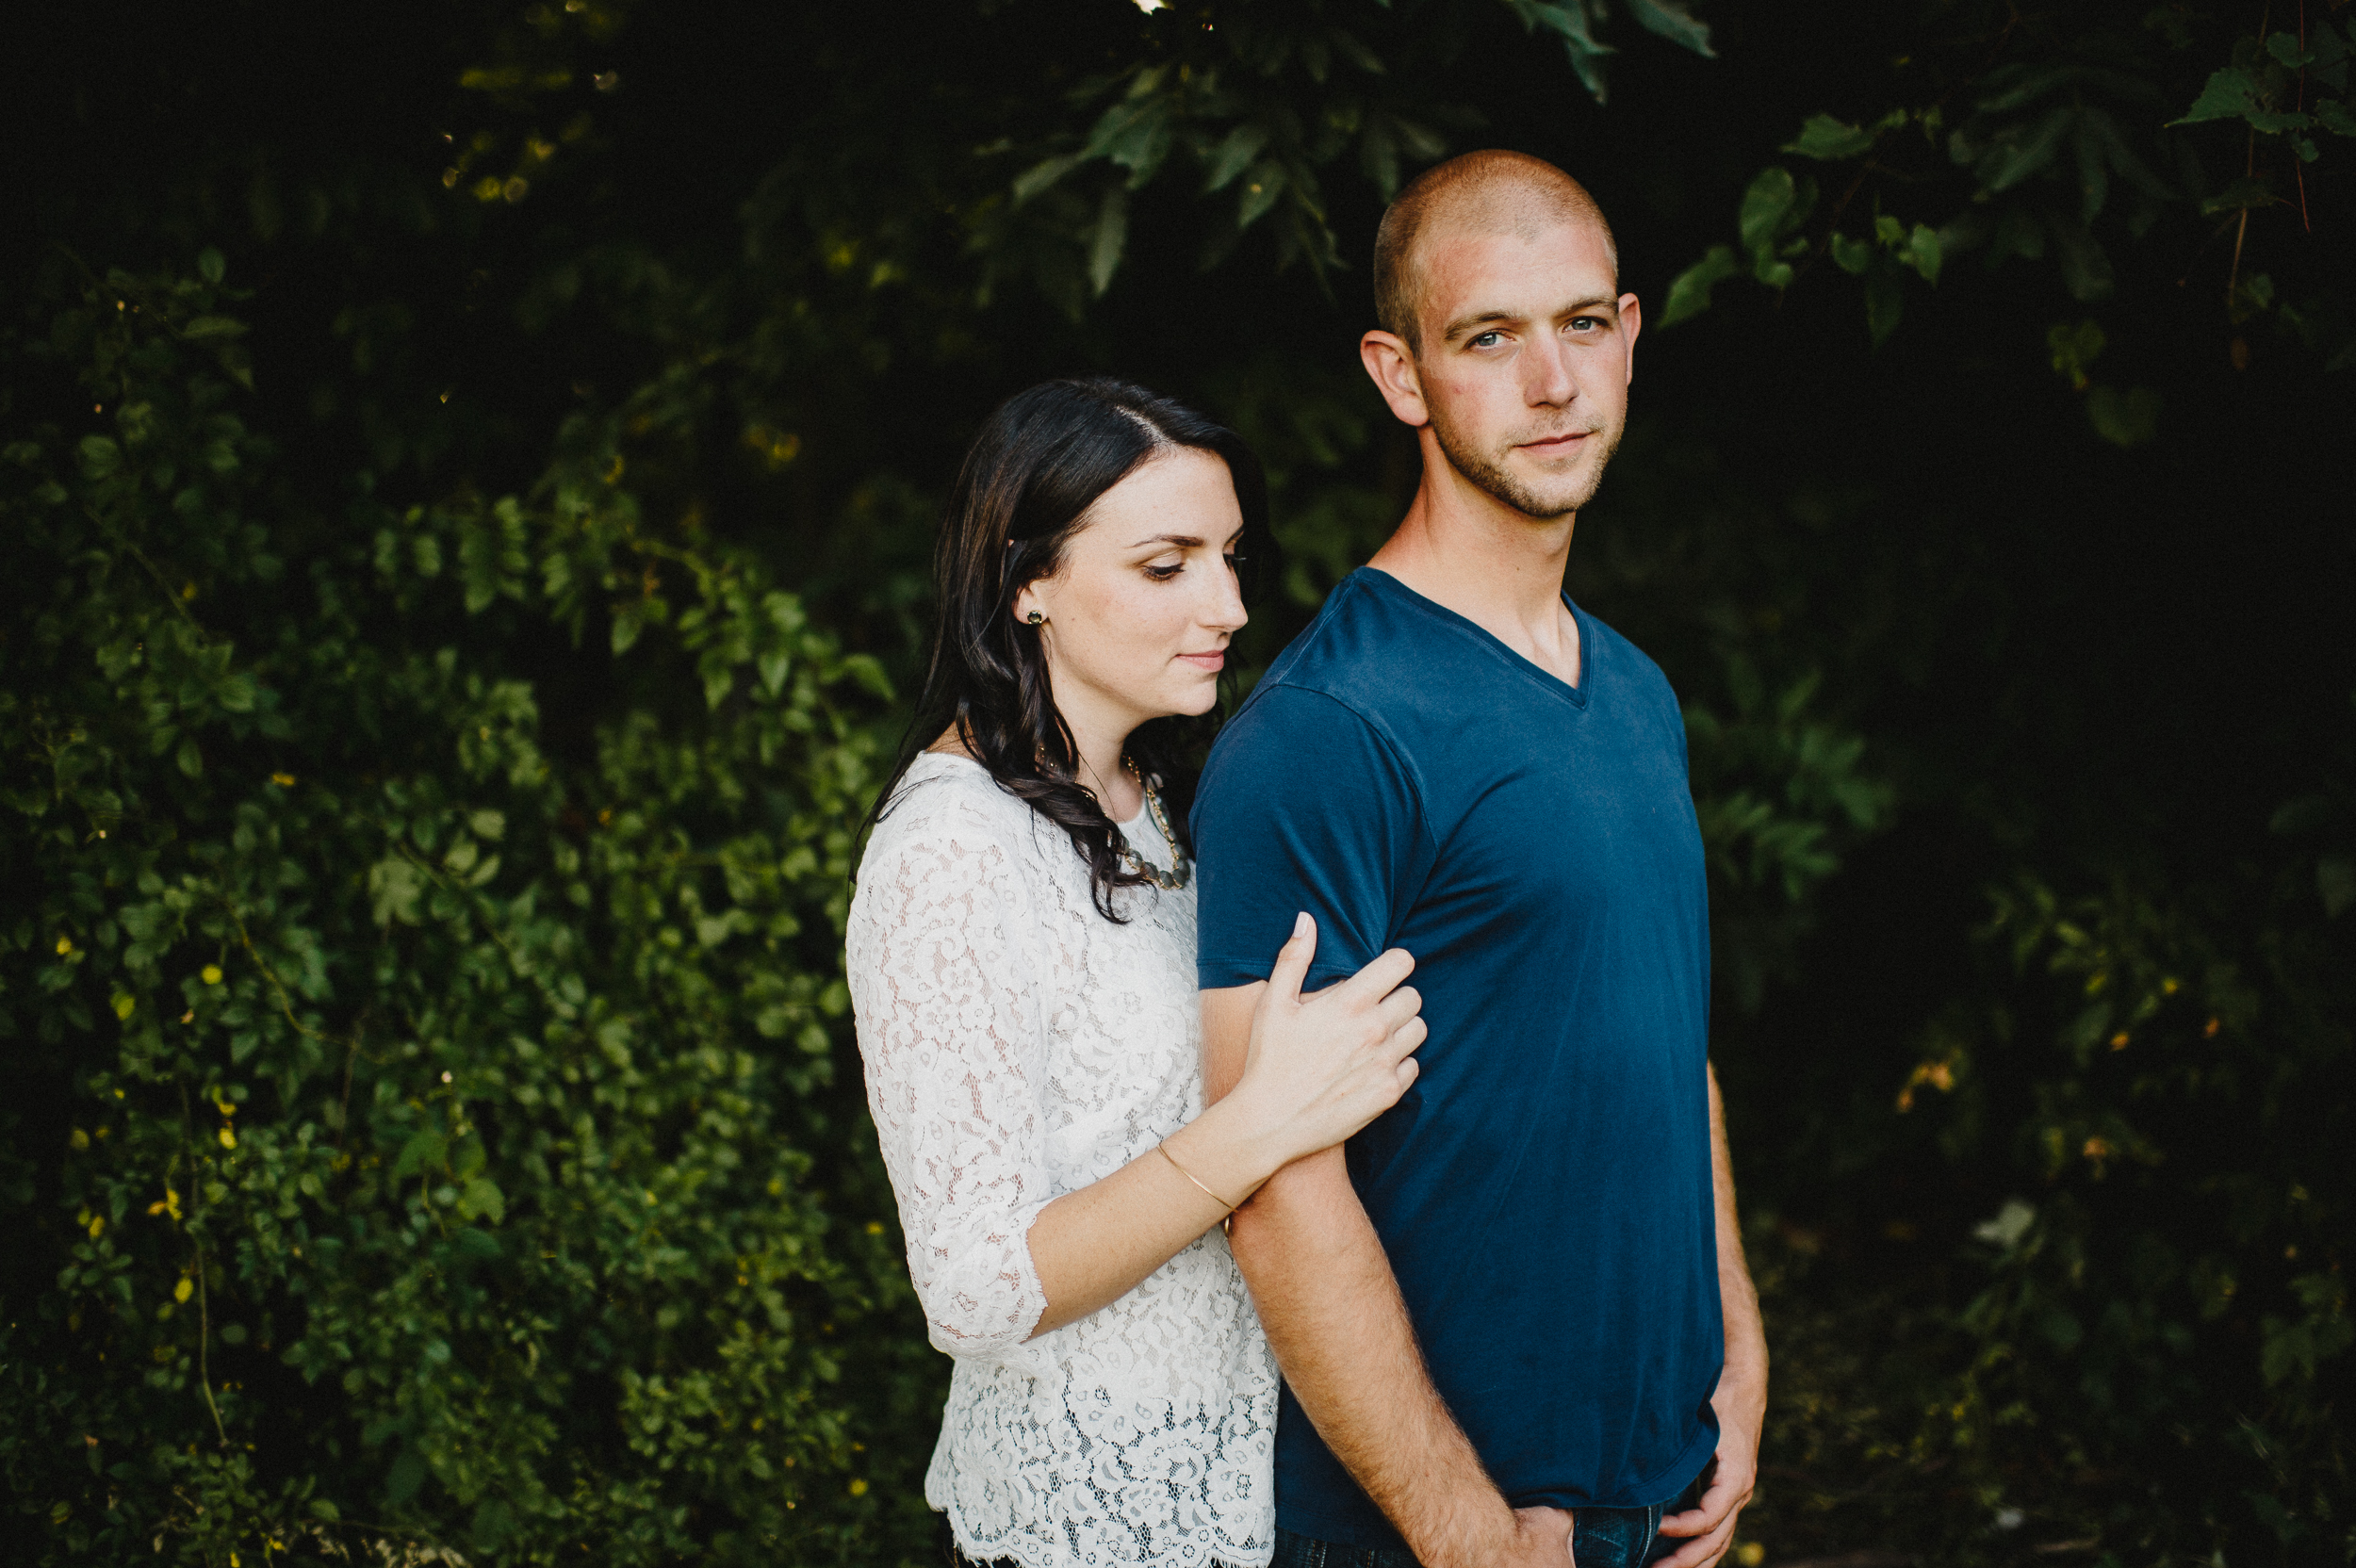 pat-robinson-photography-pa-engagement-session-9.jpg